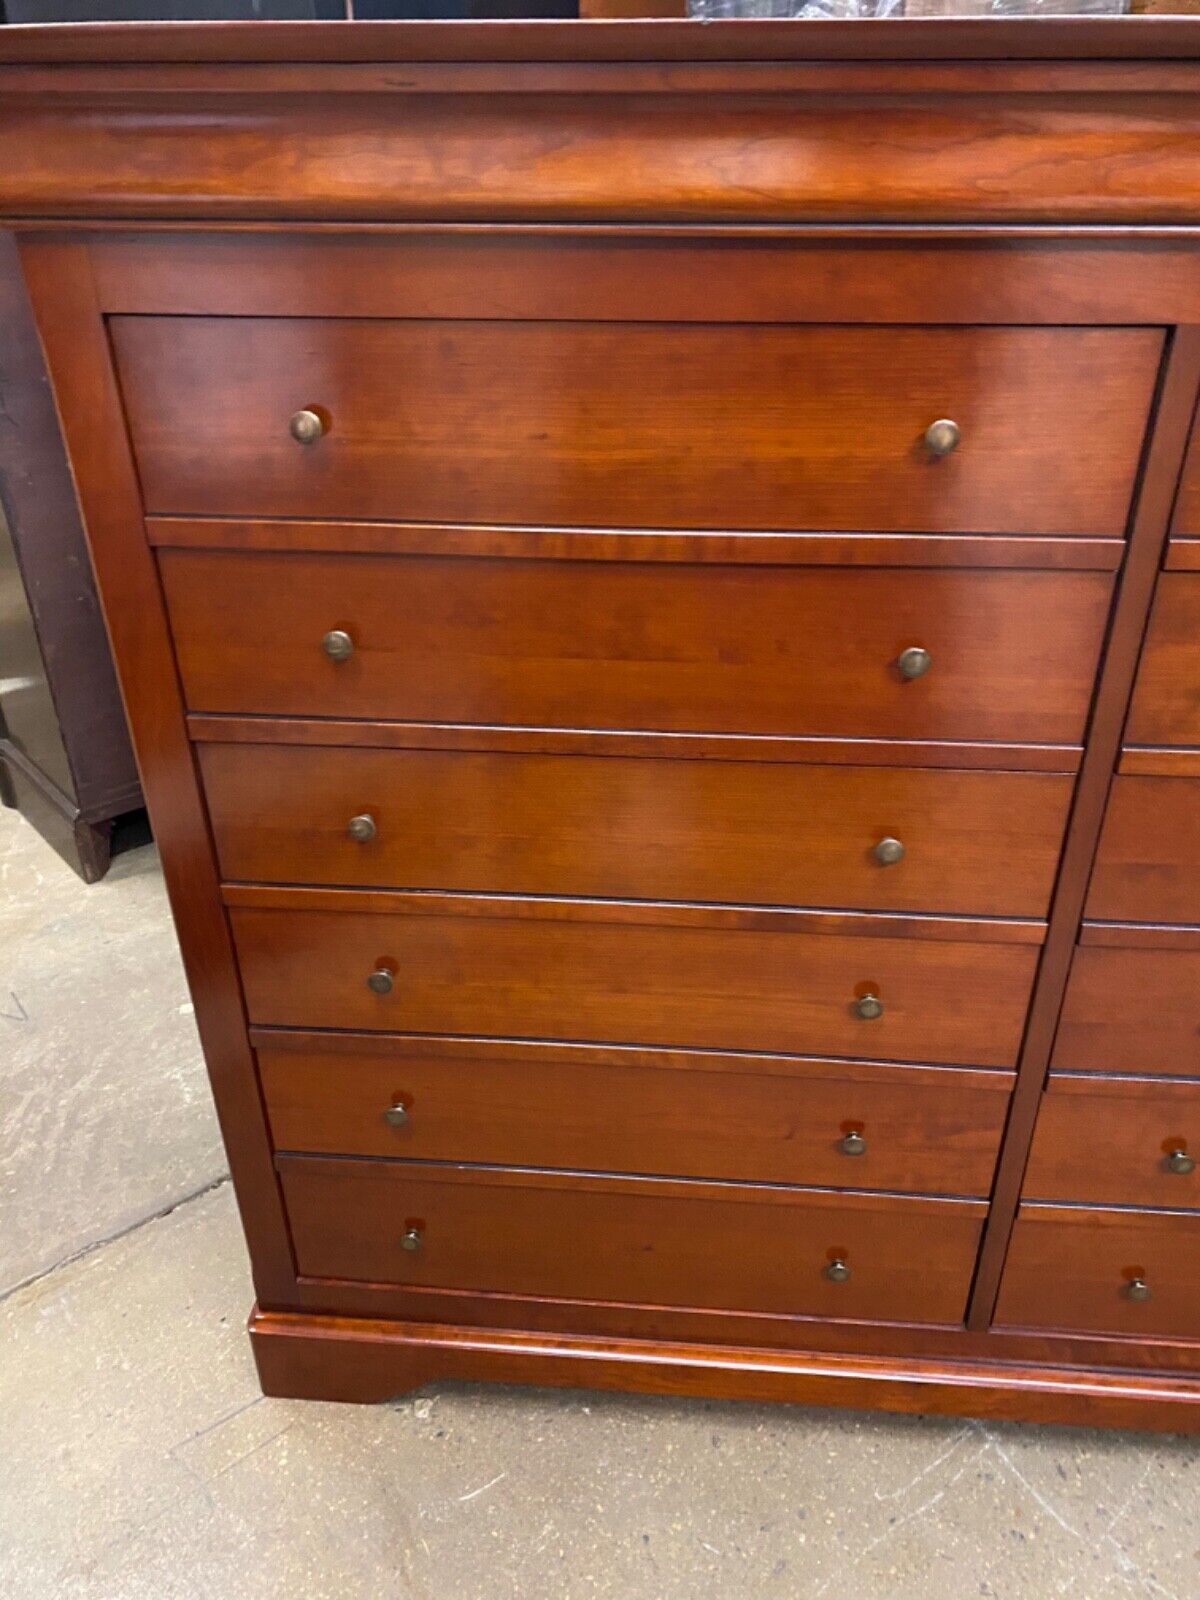 French Country Solid Cherry Wood 14 Drawer Tall Chest Dresser - Made in France